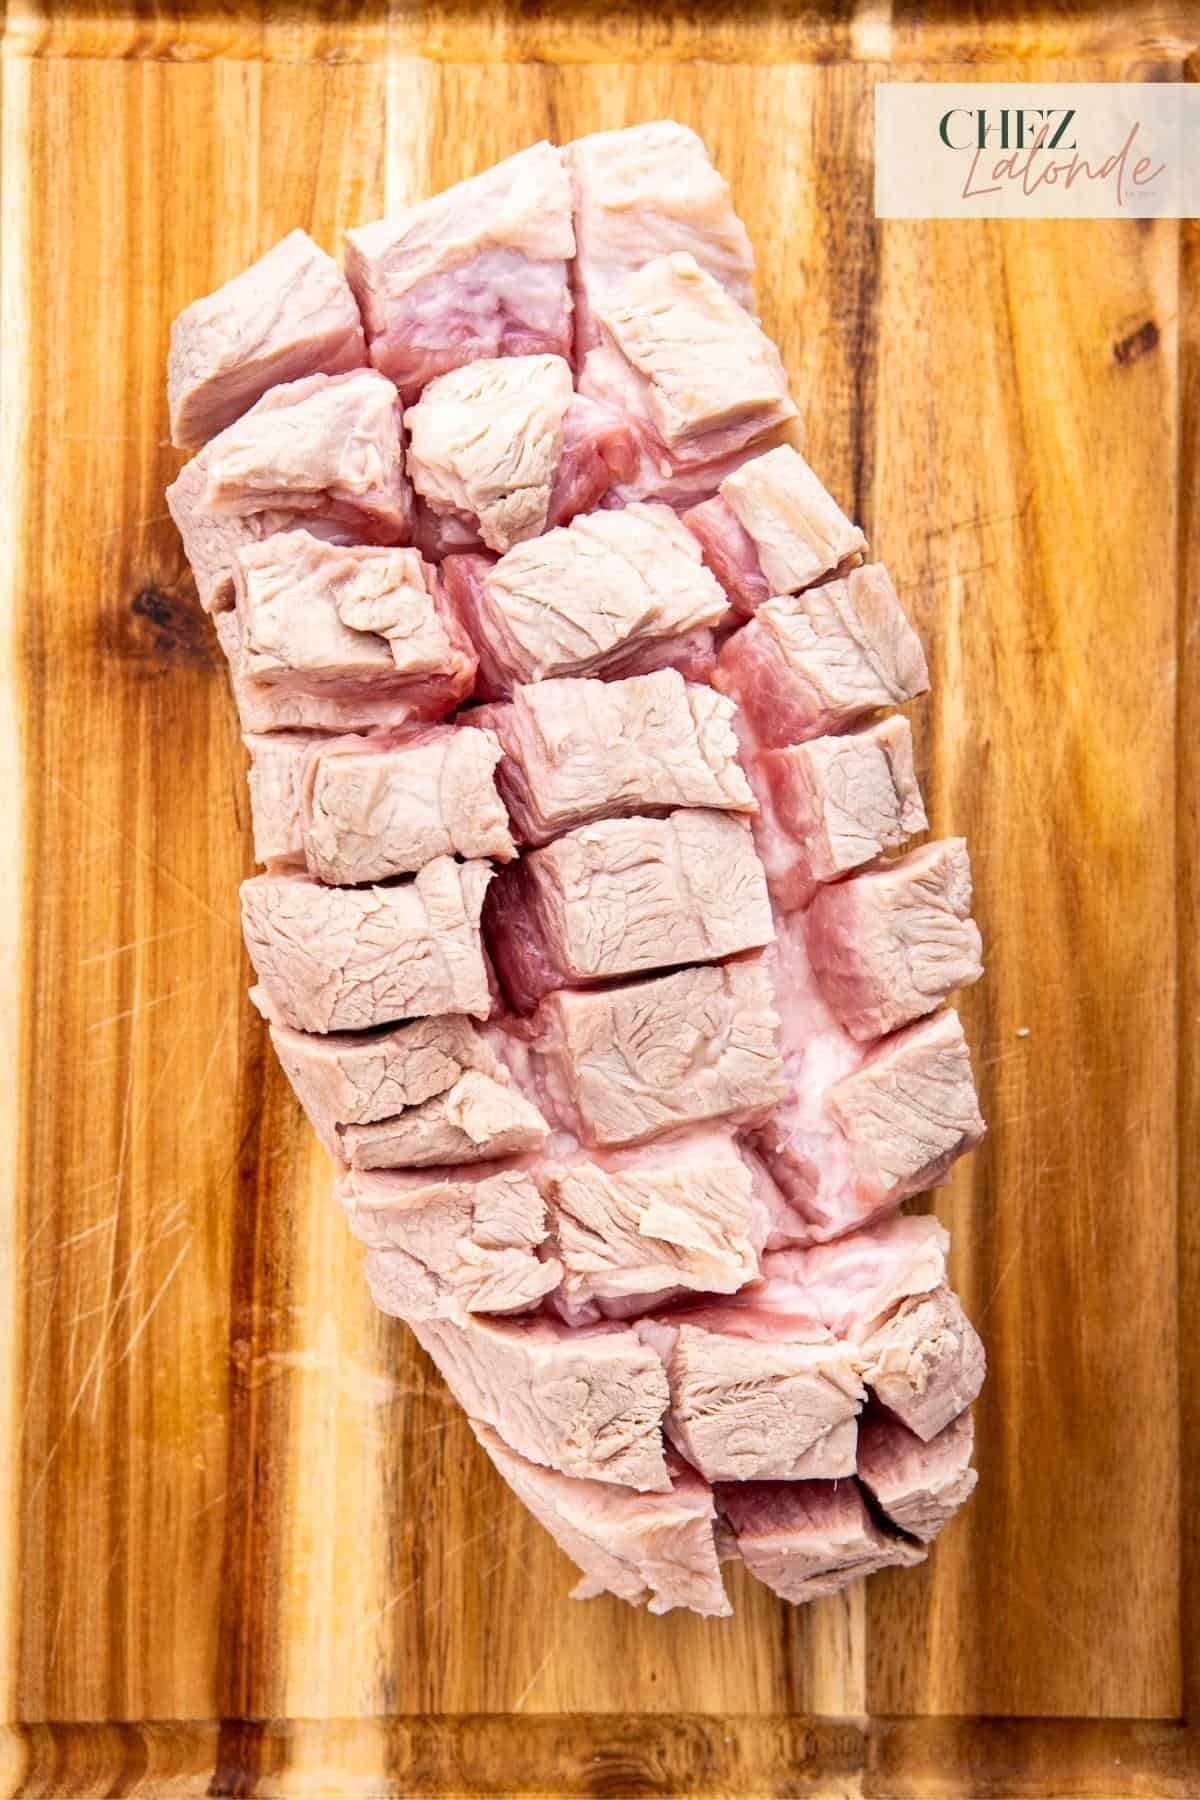 Cut the meat evenly to form a checking pattern that is around 1X1 inch square.